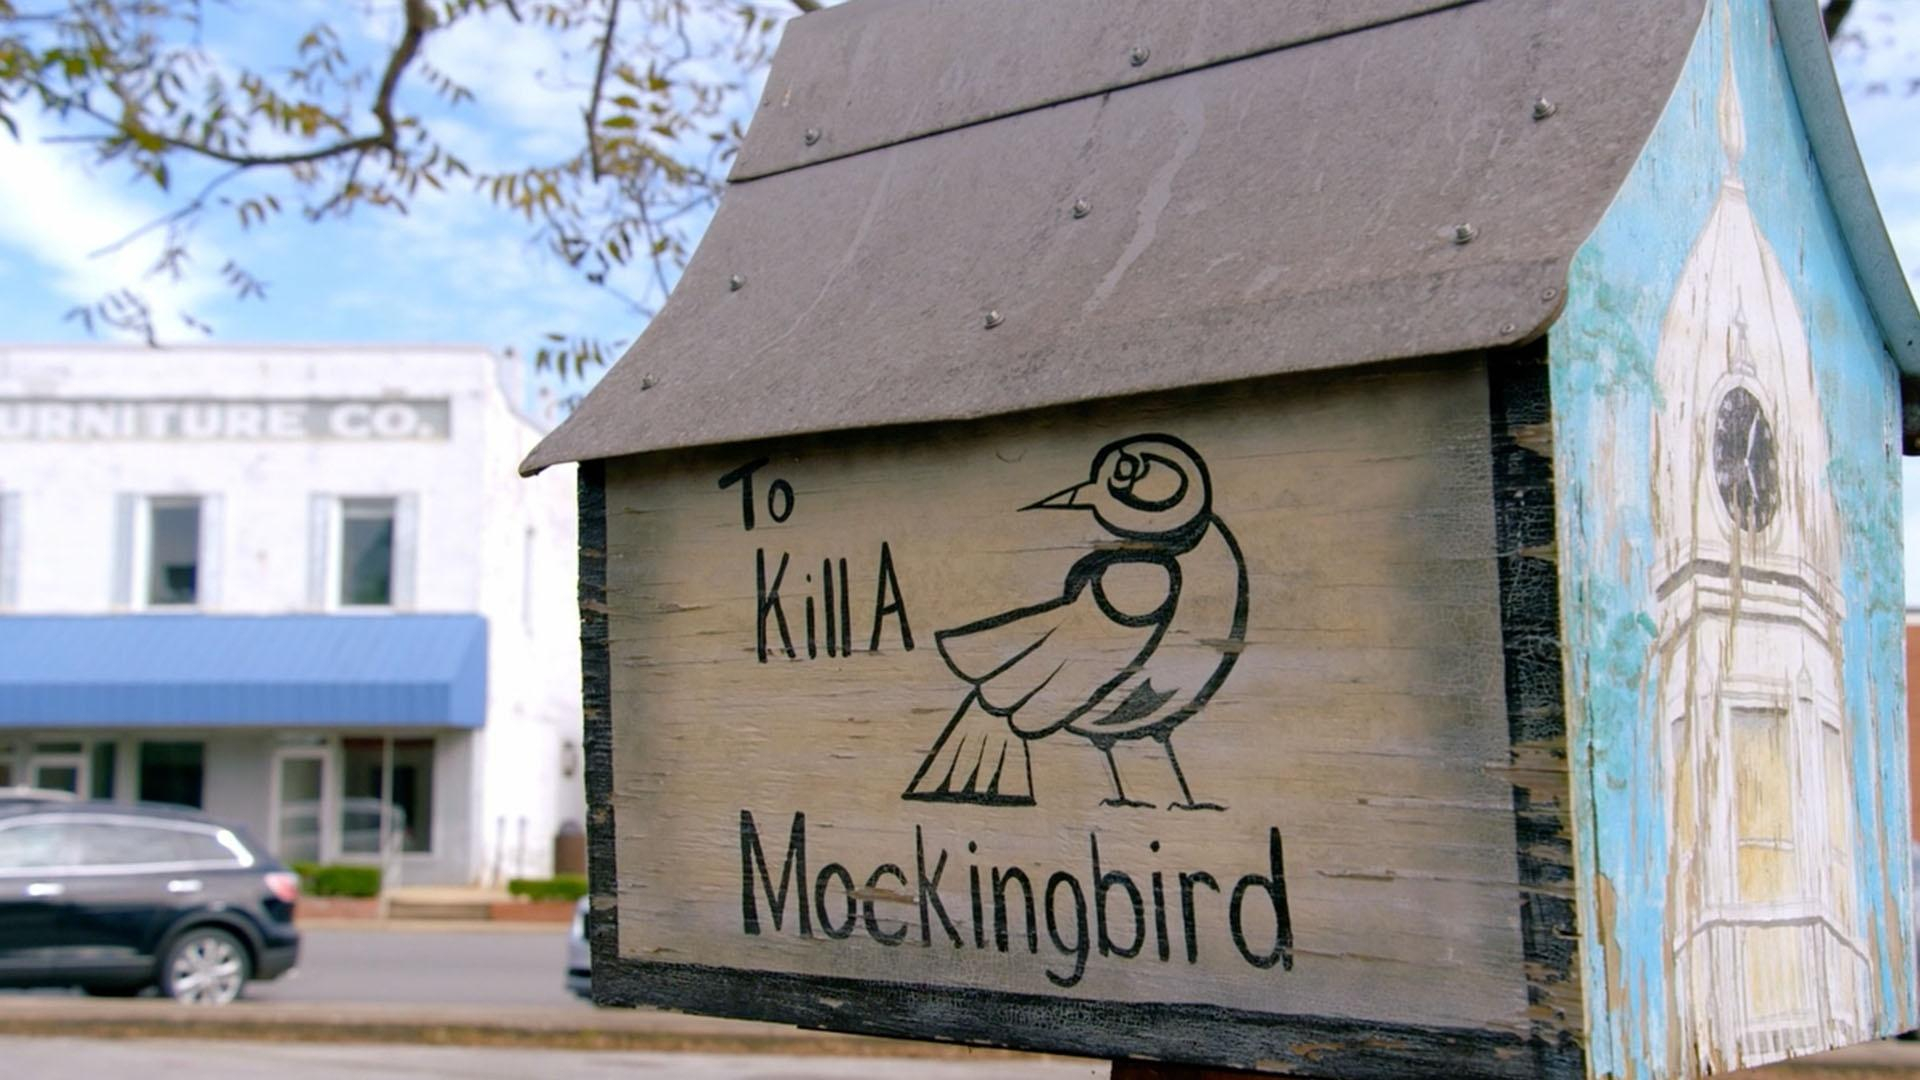 1920x1080 The Great American Read | To Kill a Mockingbird | Episode 3 | PBS